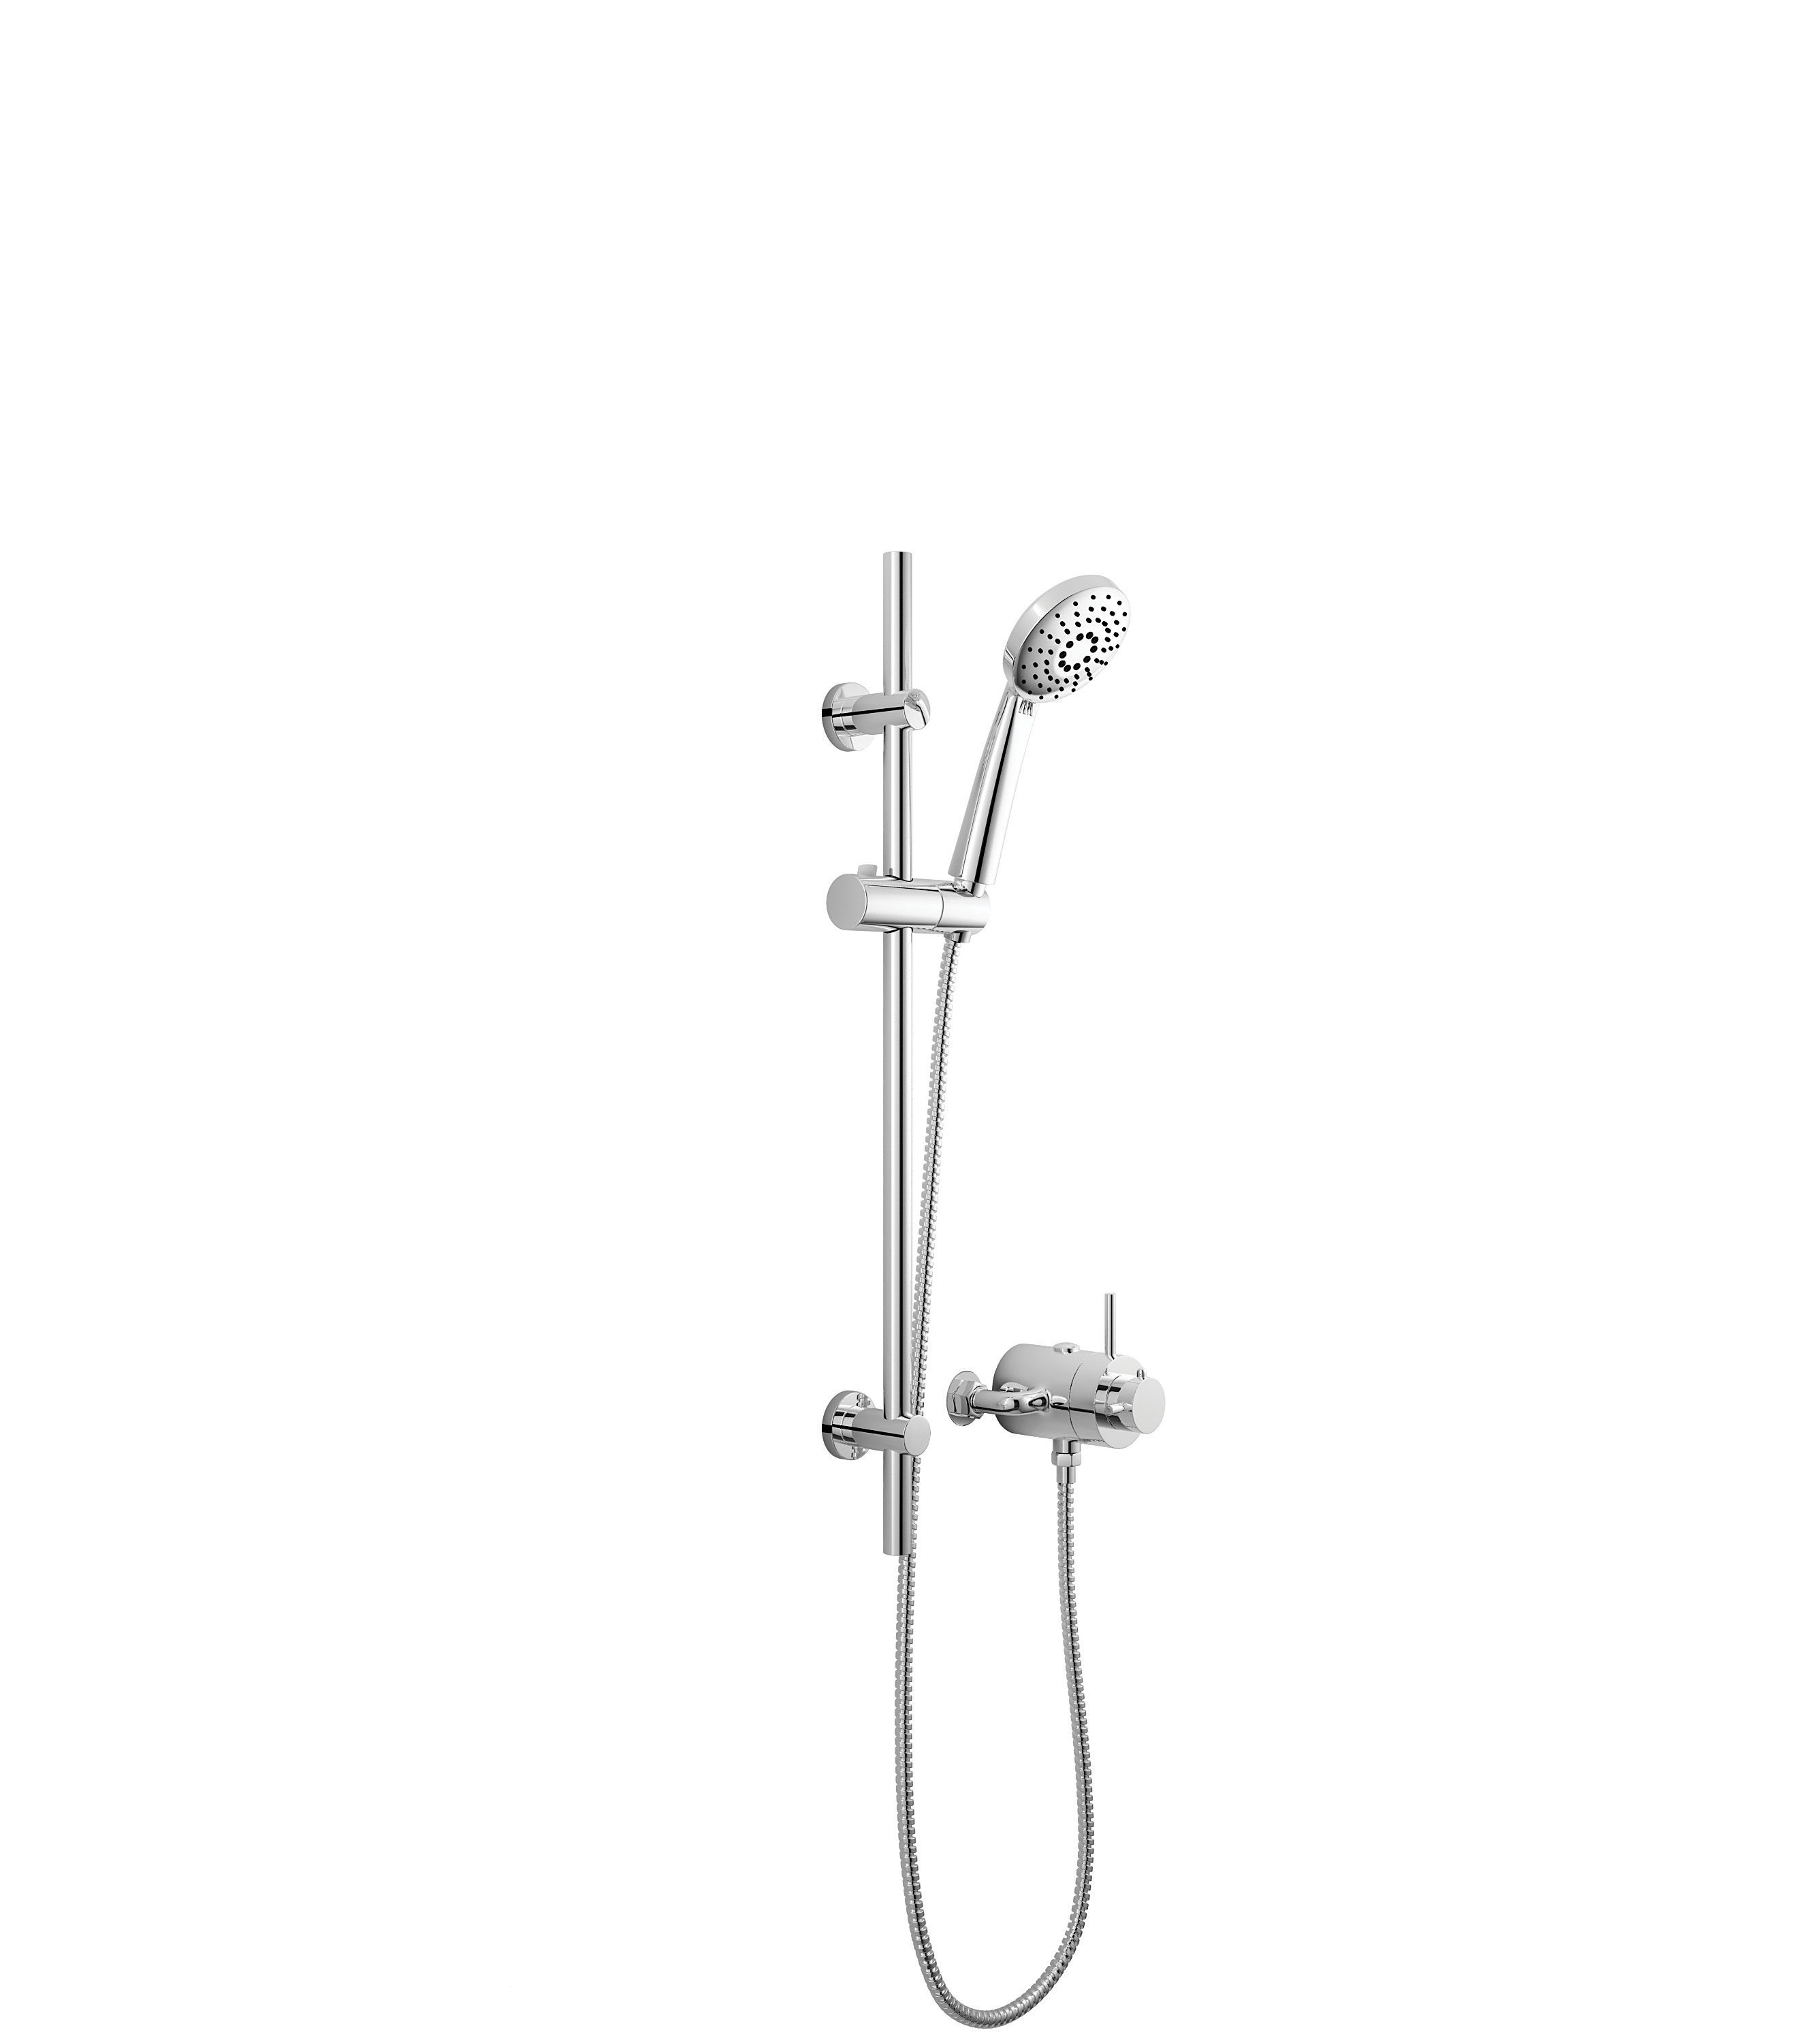 Image of Wickes Style Thermostatic Mixer Shower - Chrome